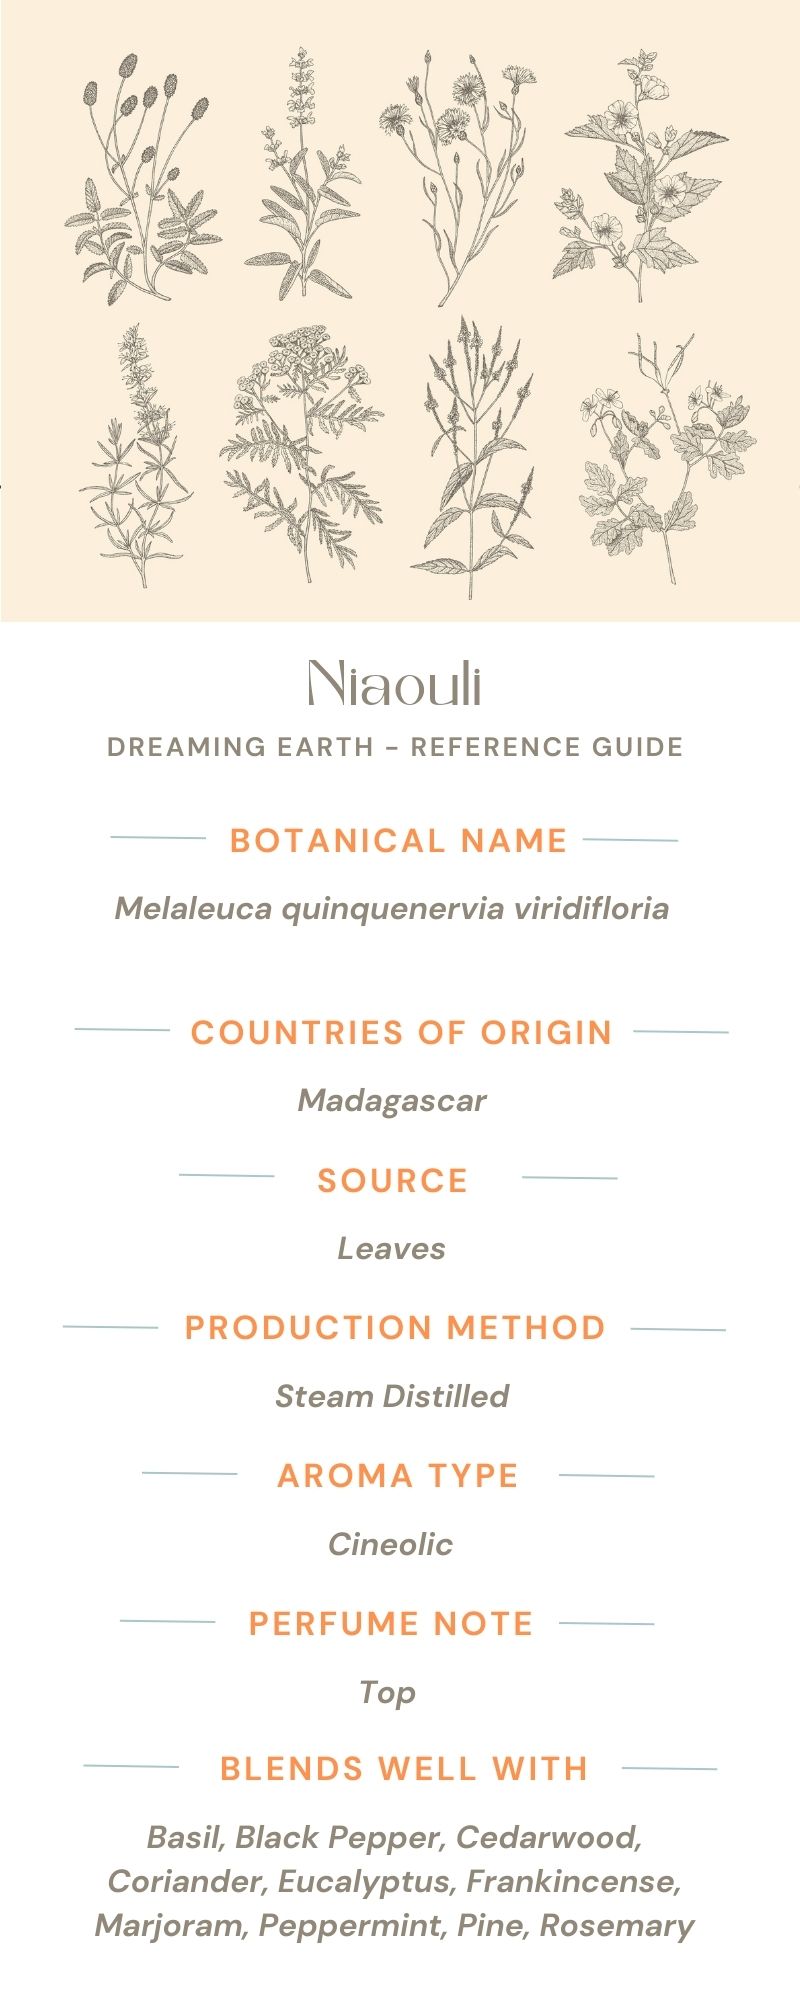 Load image into Gallery viewer, Niaouli Organic Essential Oil - Dreaming Earth Inc
